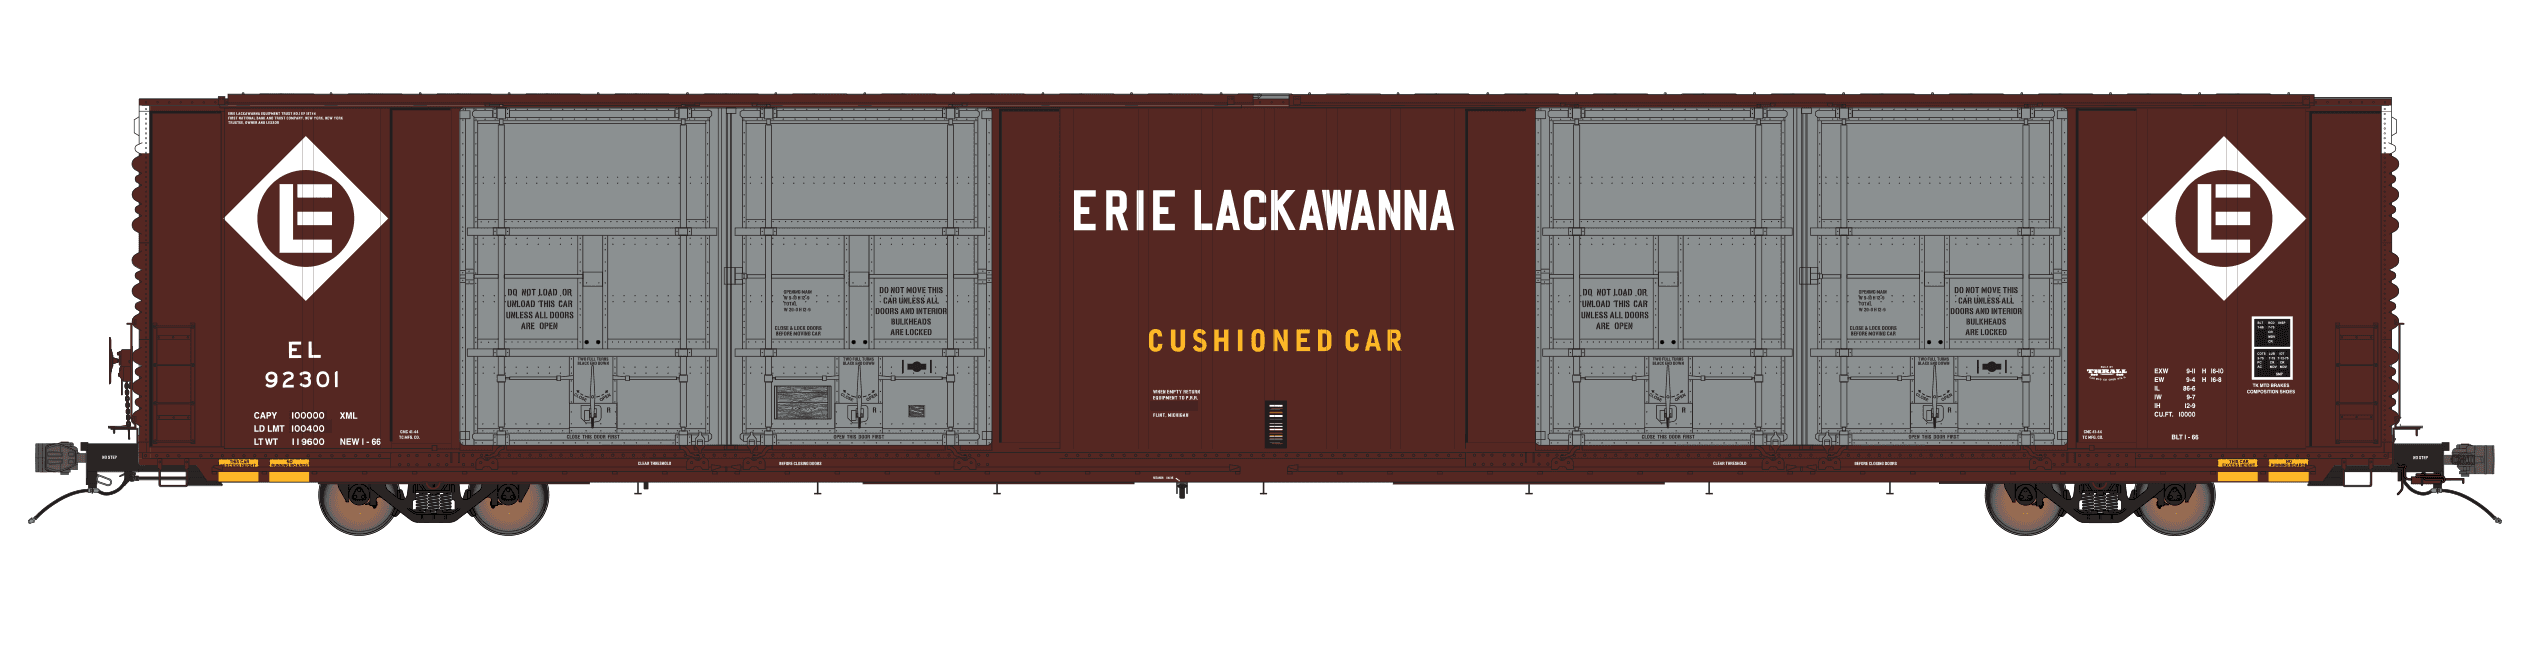 Class One Model Works FC00413 HO Scale Thrall 86' 8 Door Boxcar Erie Lackawanna EL 92304